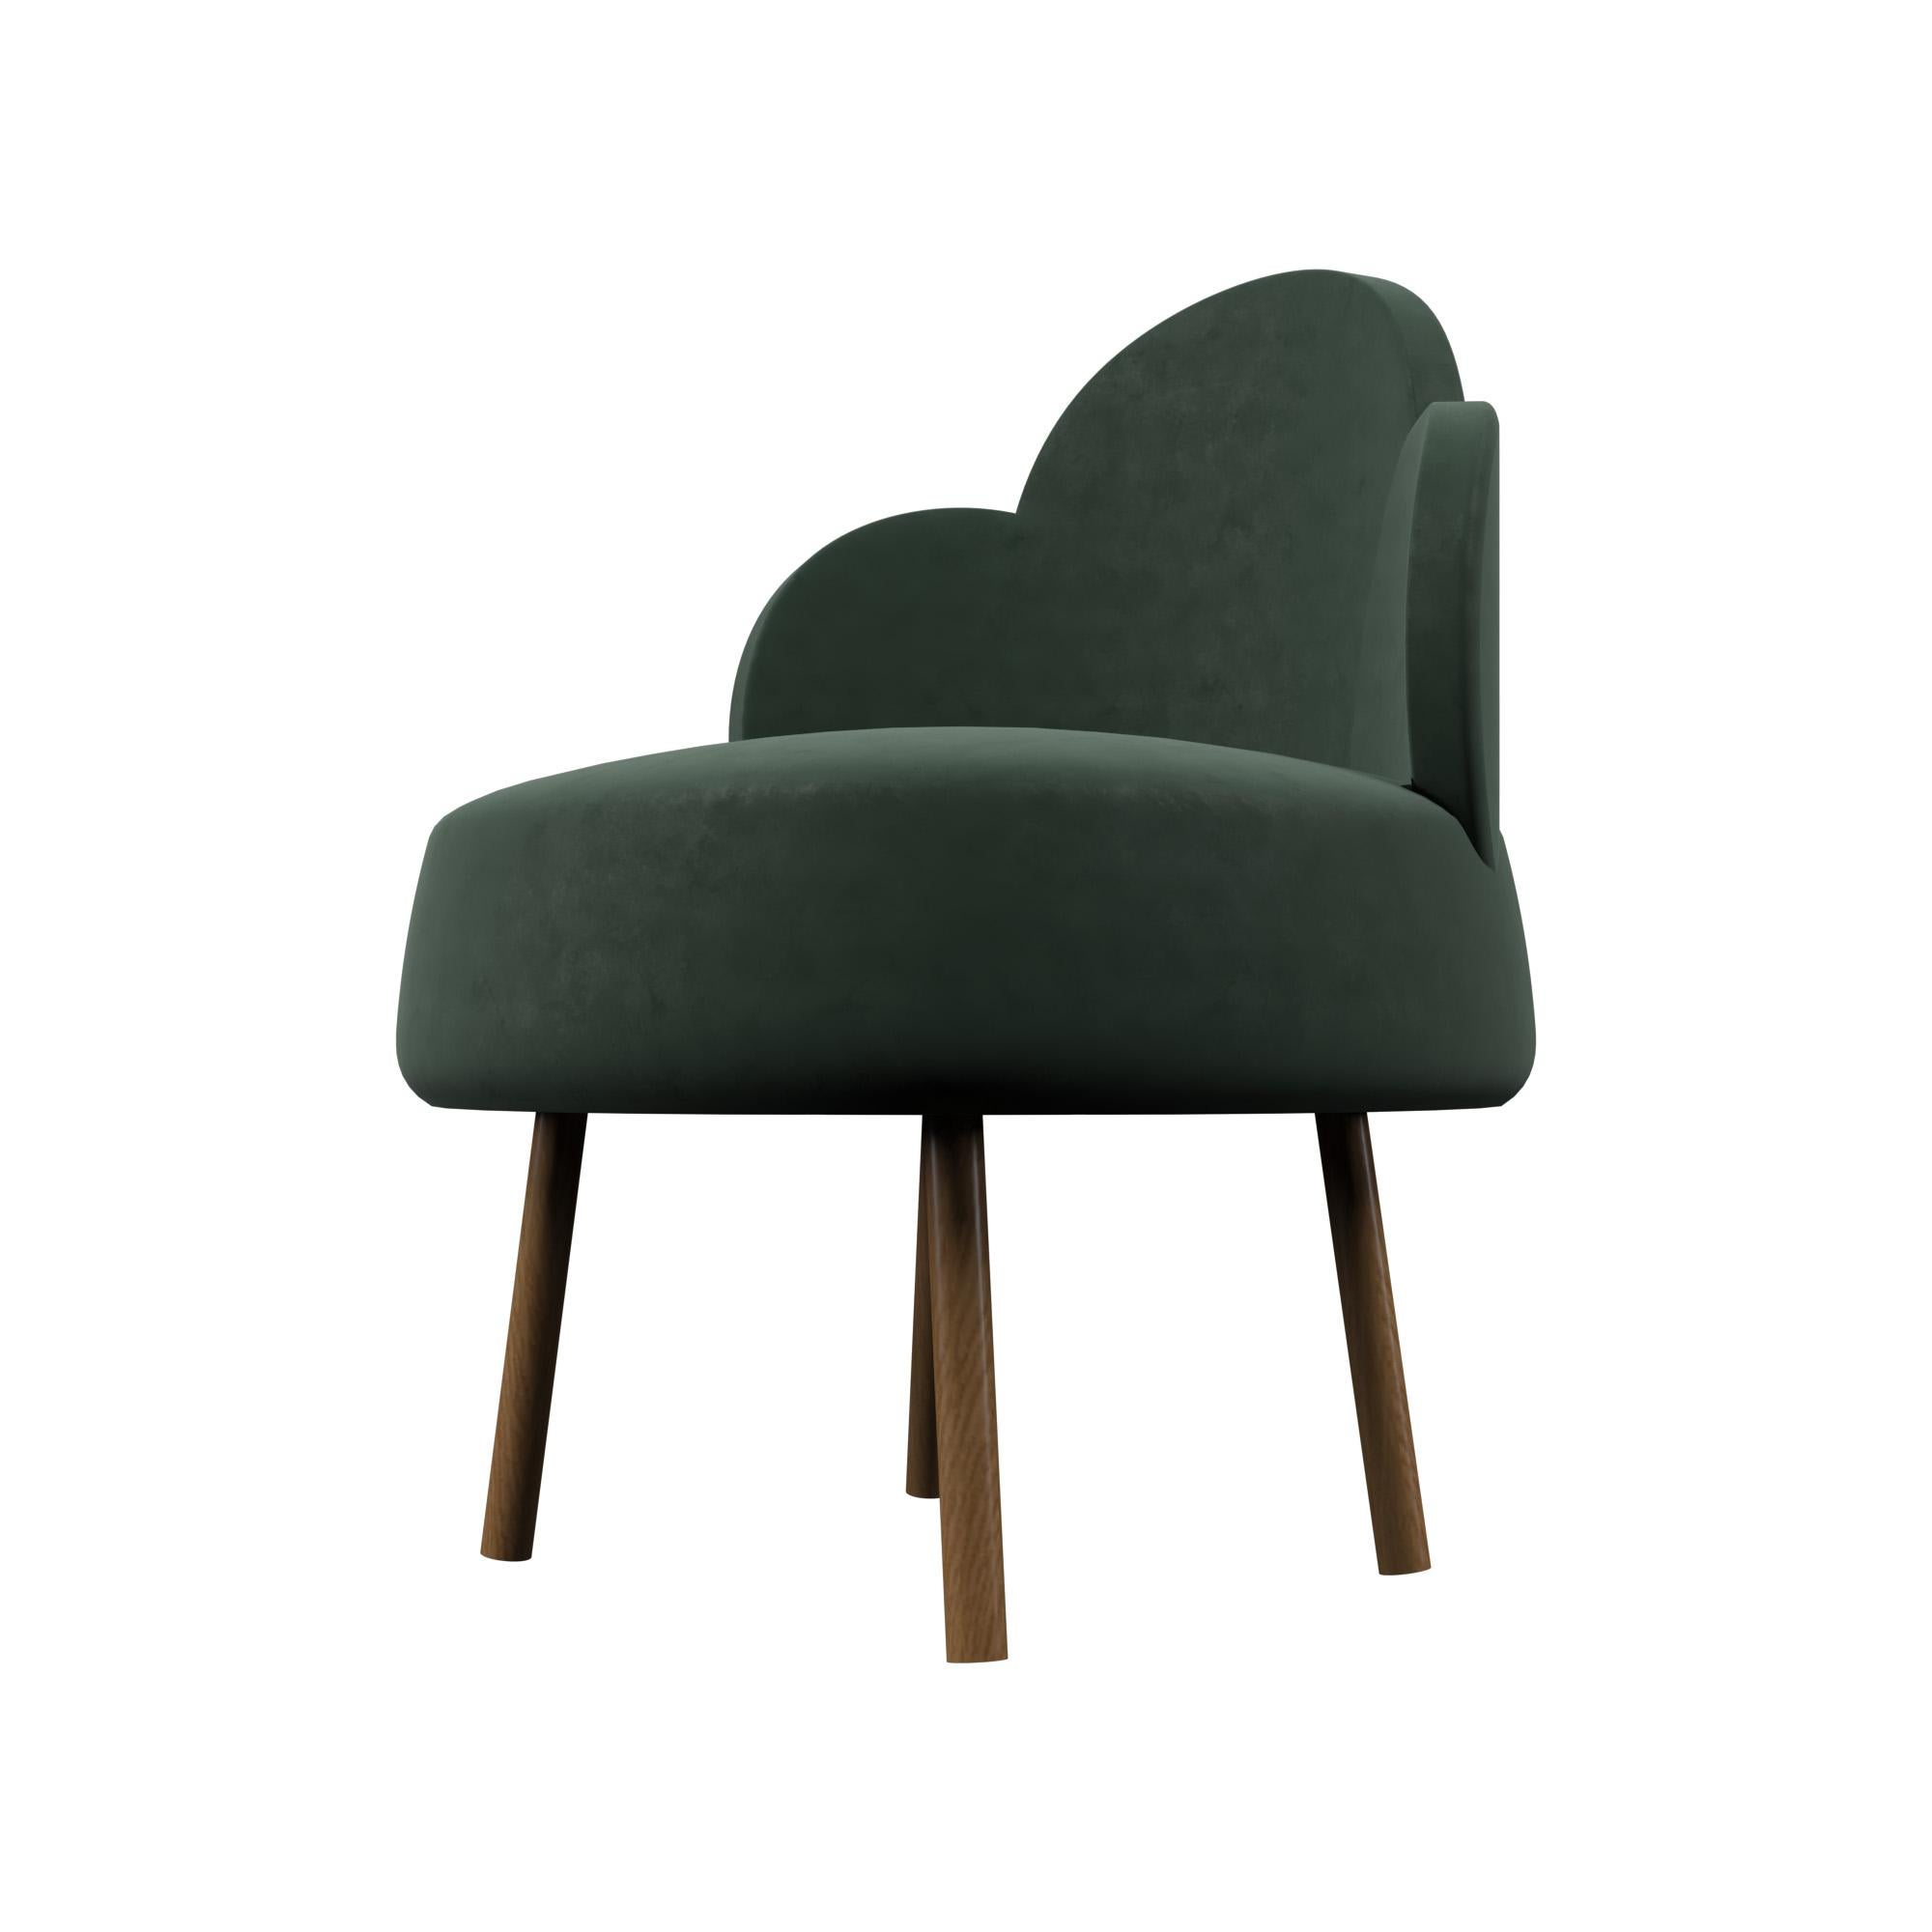 Moroccan VANCOUVERT Velvet Chair in Olive by Alexandre Ligios, REP by Tuleste Factory For Sale